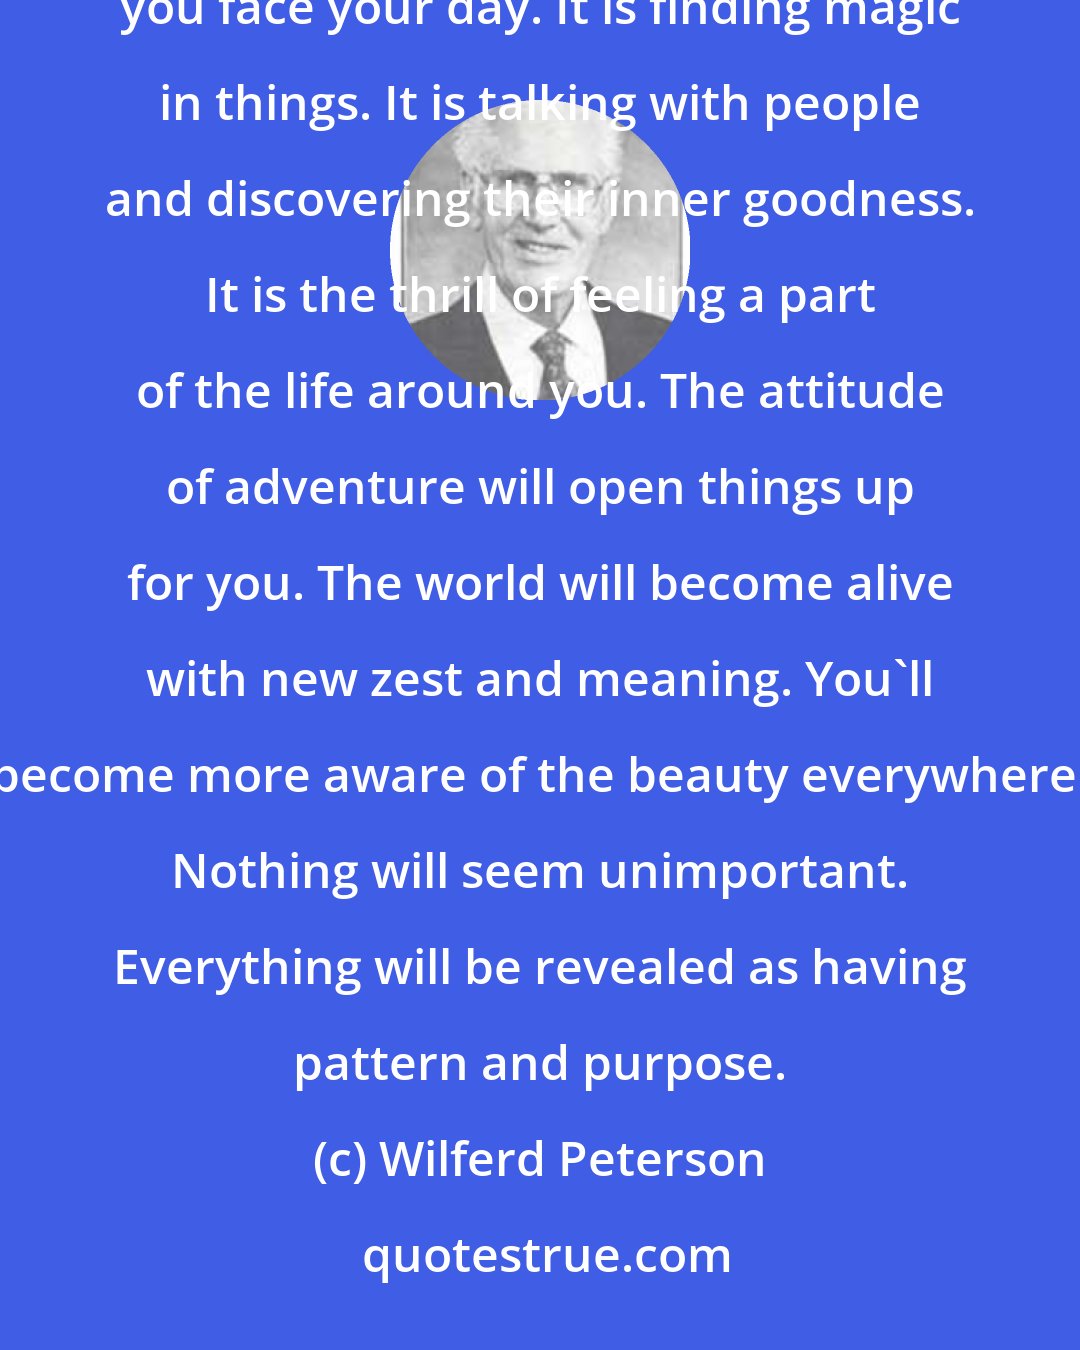 Wilferd Peterson: Adventure begins with you, personally. It is in the way you look at things. It is the mental stance you take as you face your day. It is finding magic in things. It is talking with people and discovering their inner goodness. It is the thrill of feeling a part of the life around you. The attitude of adventure will open things up for you. The world will become alive with new zest and meaning. You'll become more aware of the beauty everywhere. Nothing will seem unimportant. Everything will be revealed as having pattern and purpose.